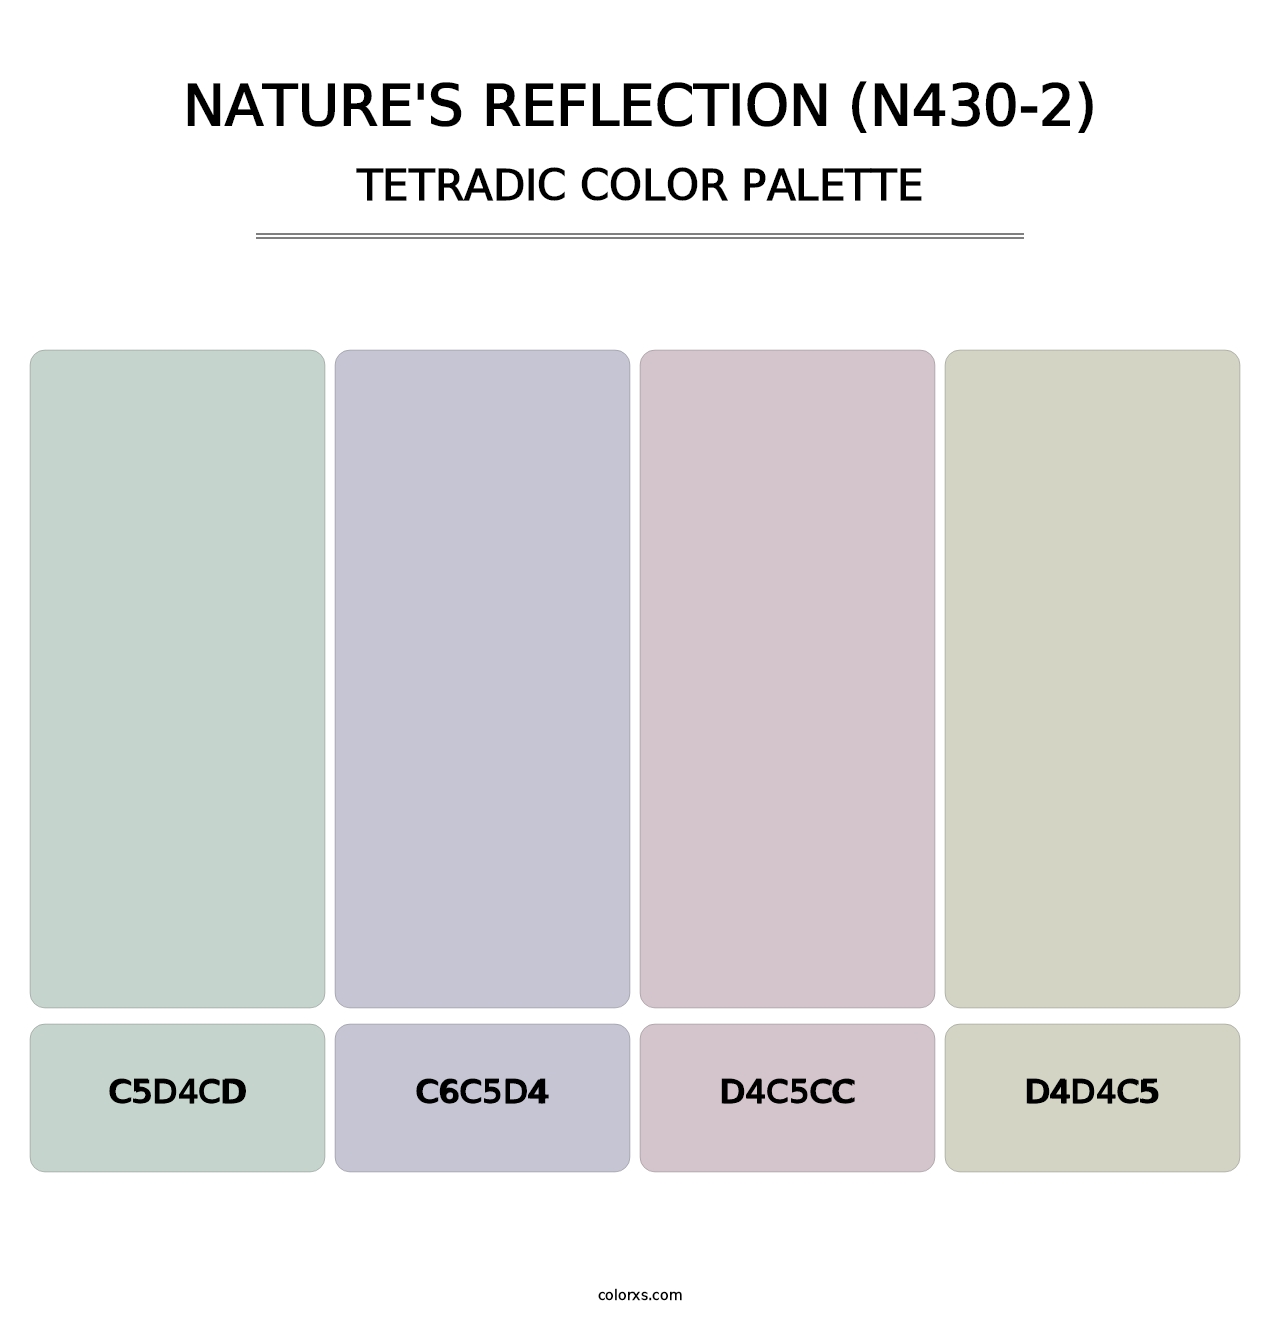 Nature'S Reflection (N430-2) - Tetradic Color Palette